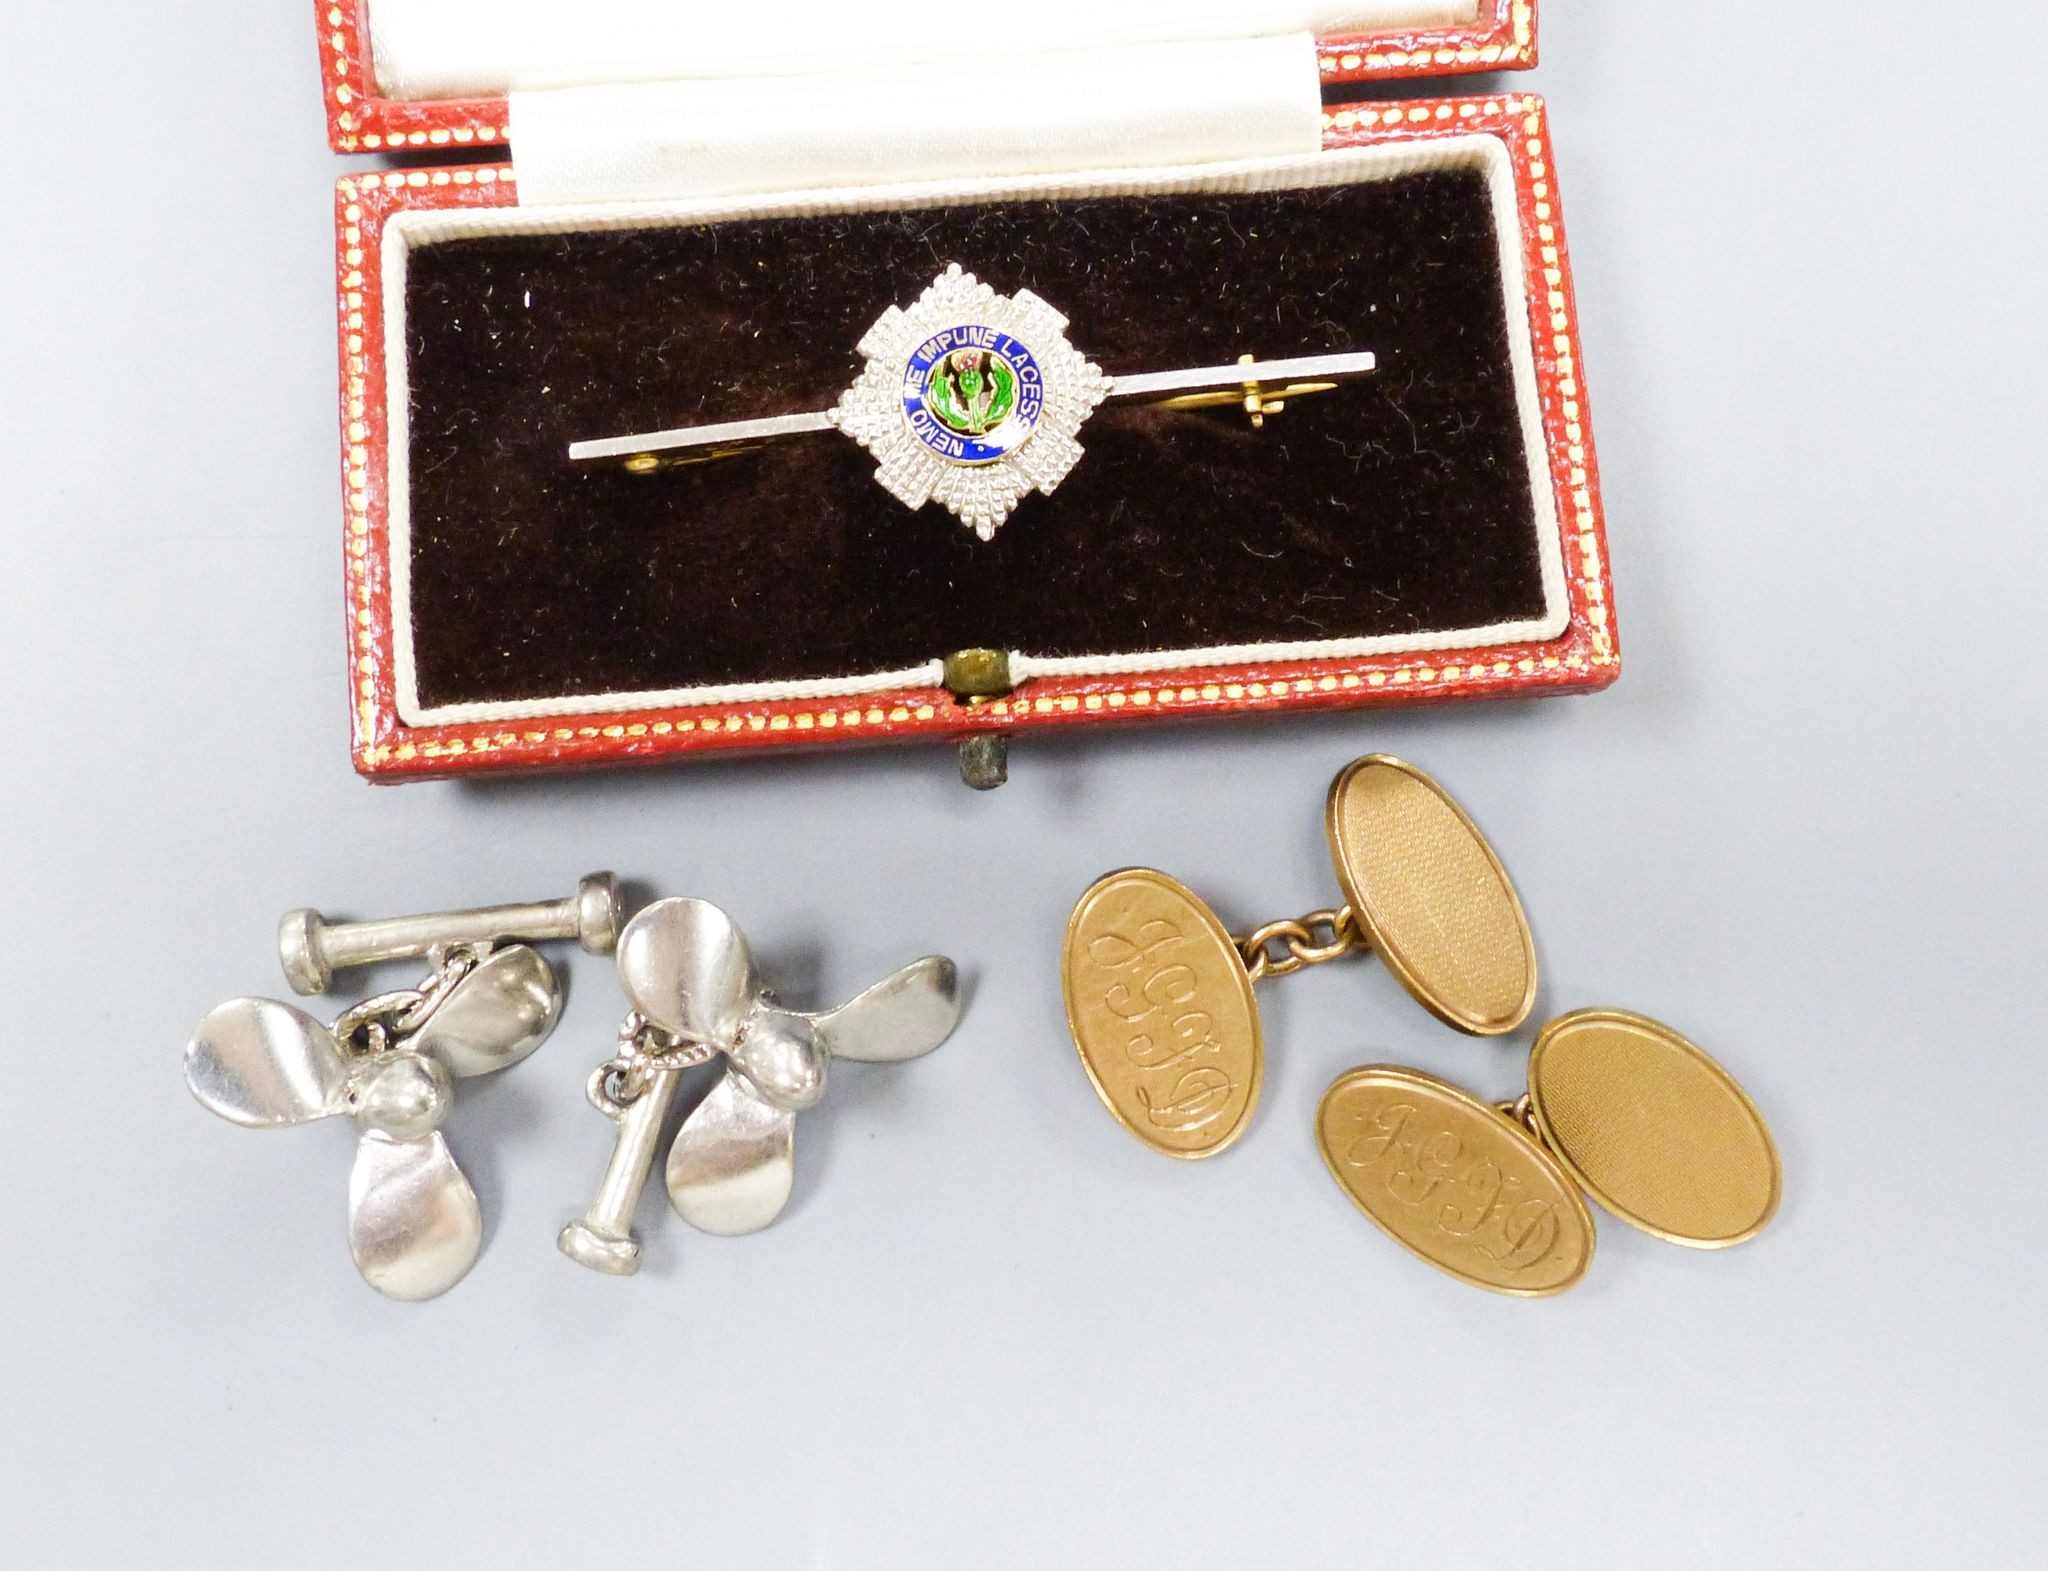 A pair of 9ct gold oval cufflinks with engraved monogram, 11.5 grams, a 14ct, plat and enamel 'Order of the Thistle' bar brooch, 47mm gross 5.1 grams and a pair of base metal propeller cufflinks.